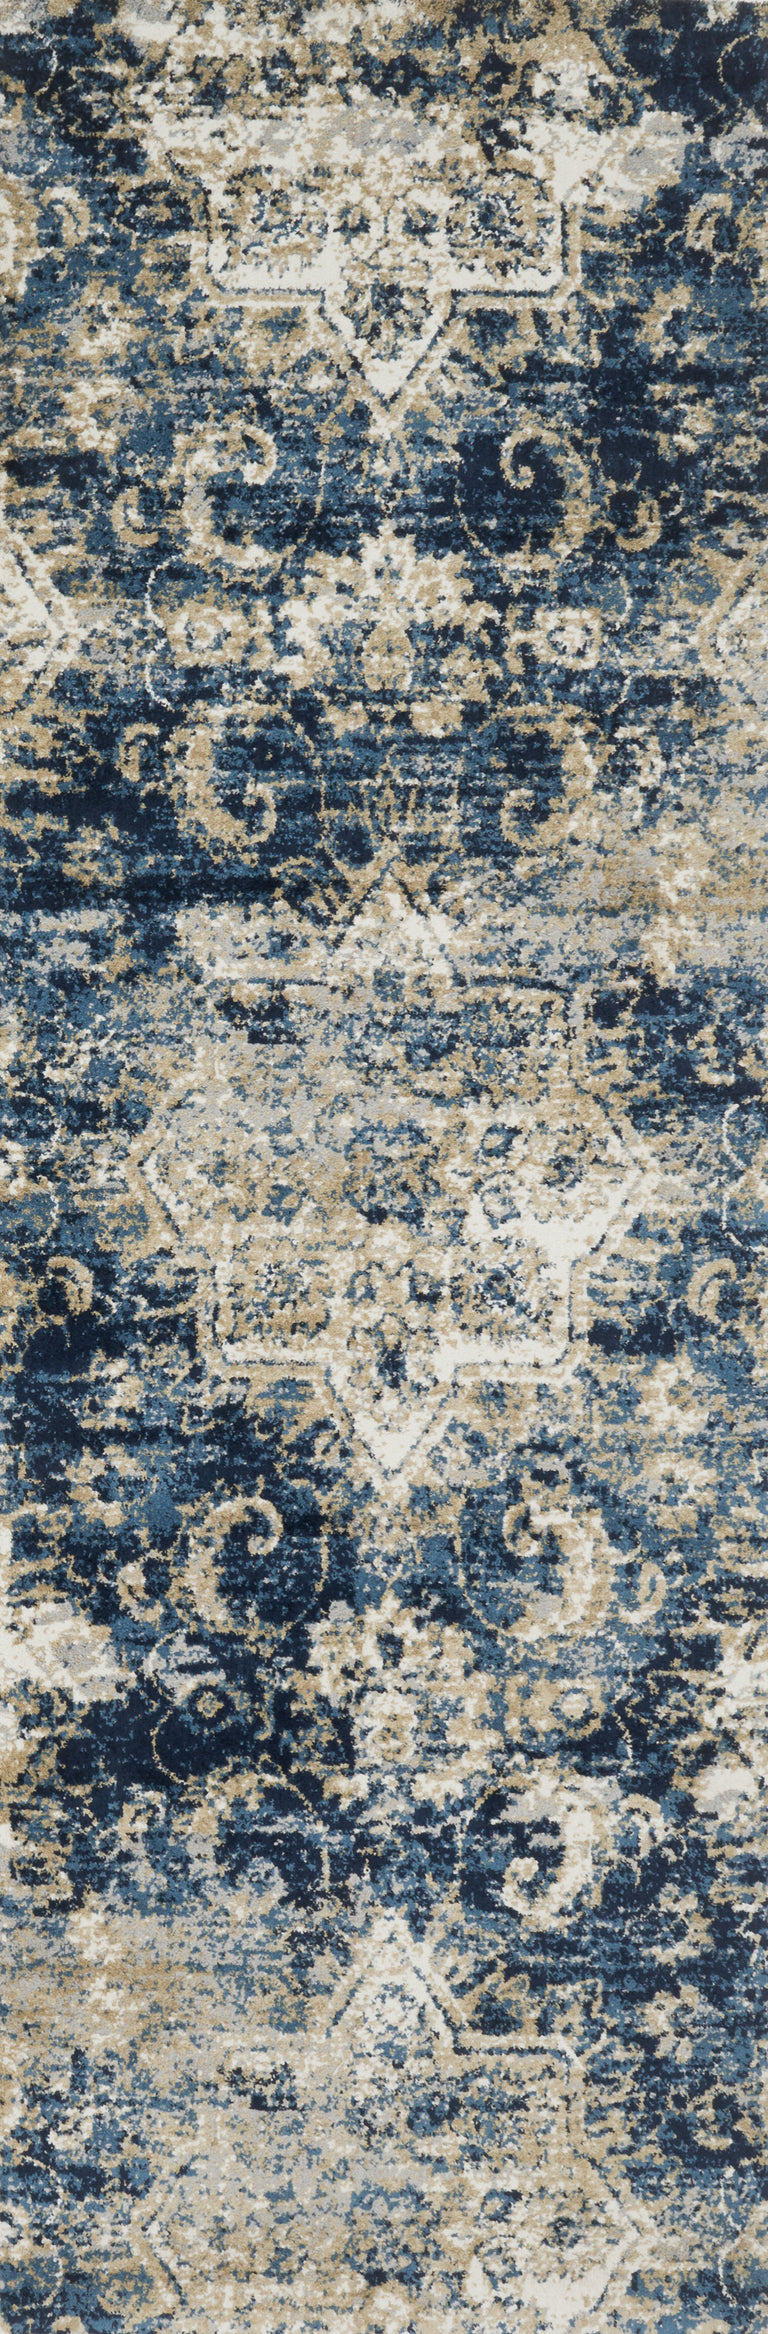 Loloi Rugs Torrance Collection Rug in Navy, Ivory - 6'7" x 9'2"